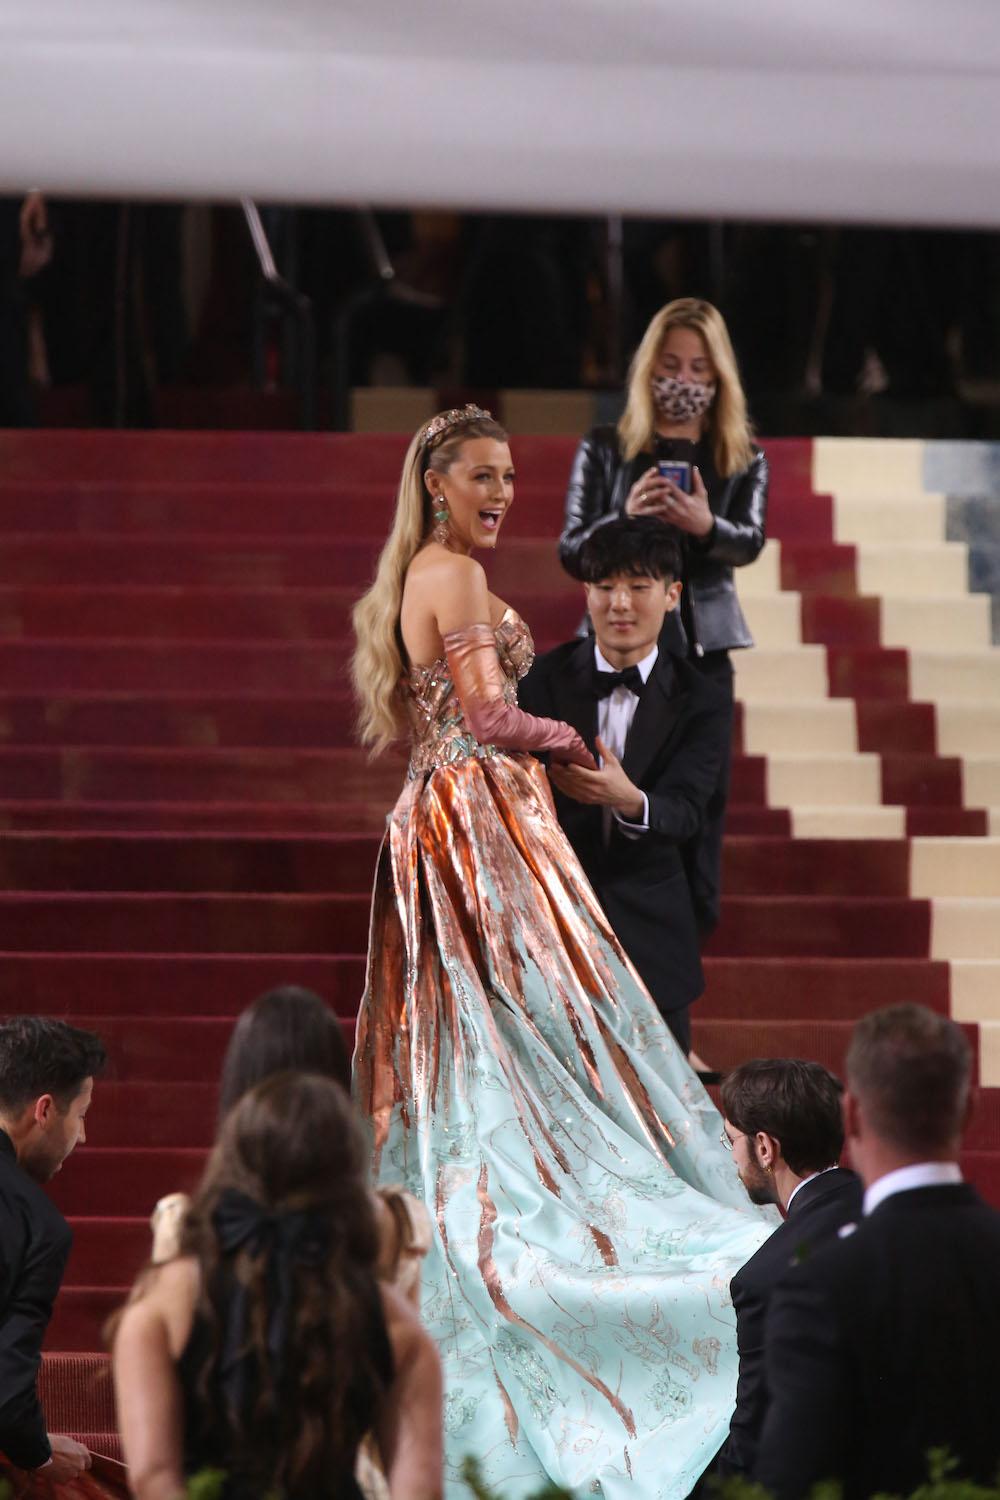 Blake Lively Confirmed Her Met Gala 2022 Dress Had a Hidden “Gossip Girl”  Reference — See Photos